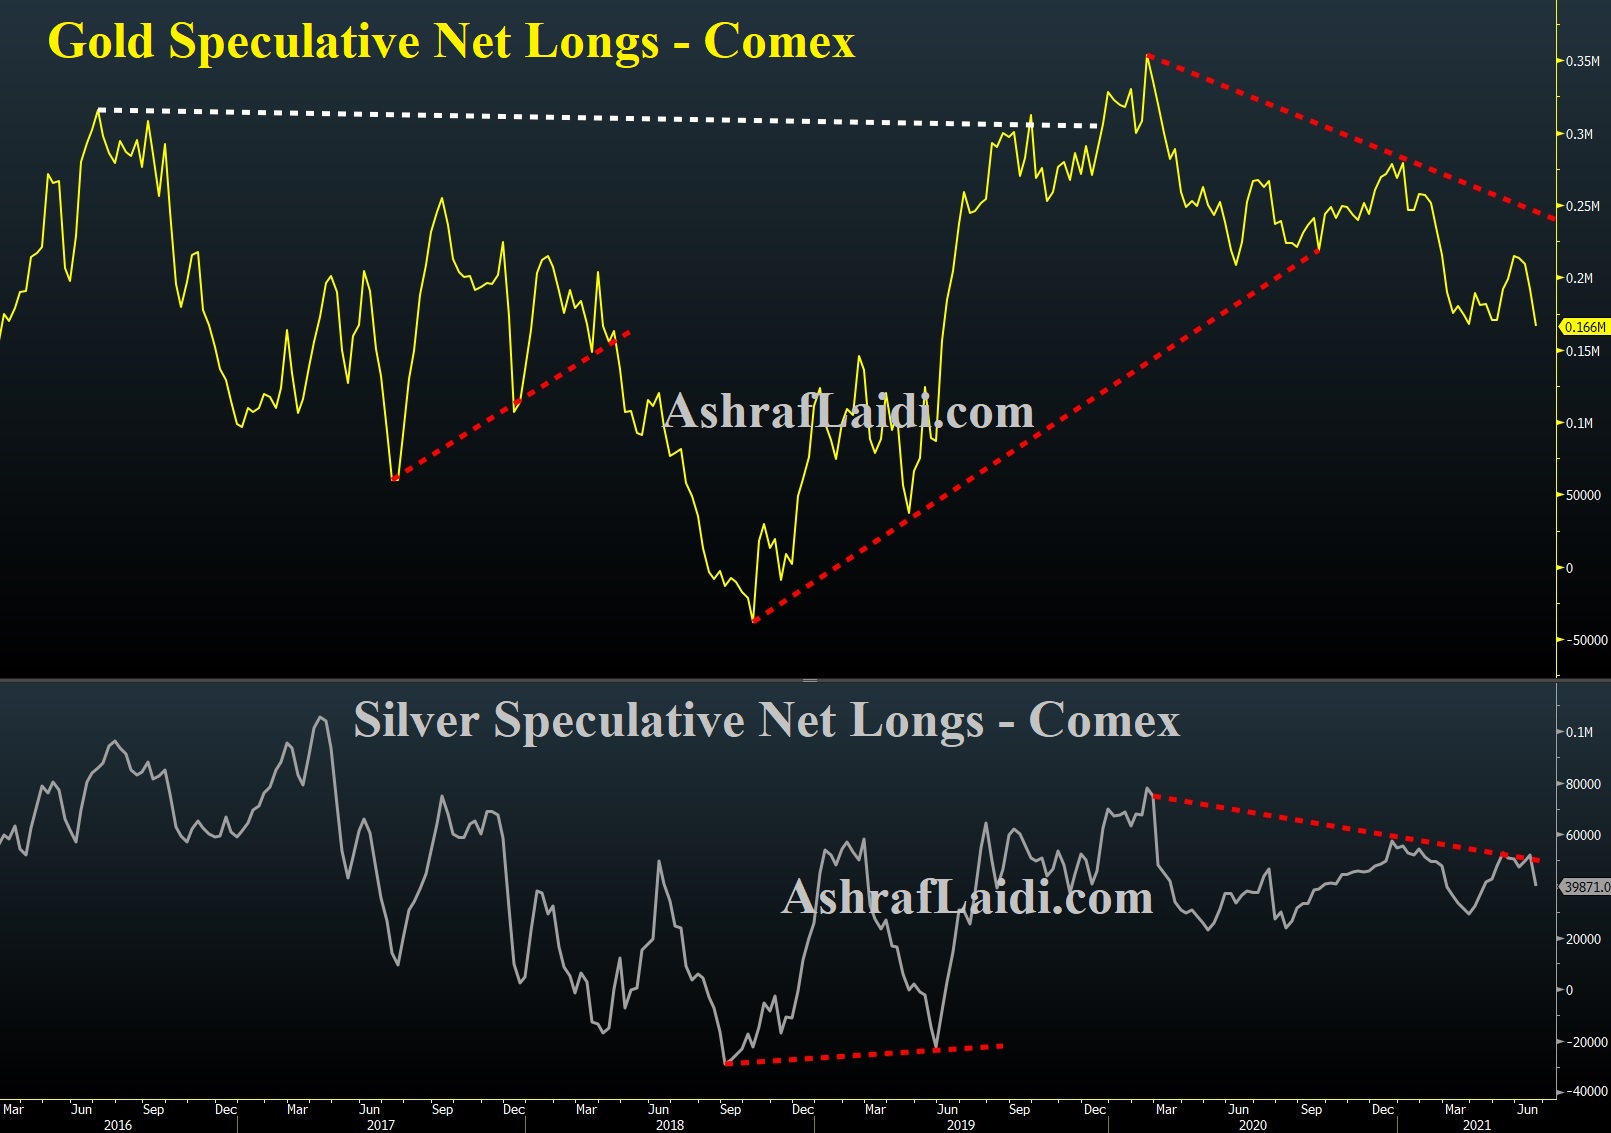 Gold - Silver Speculative Net Longs - Comex